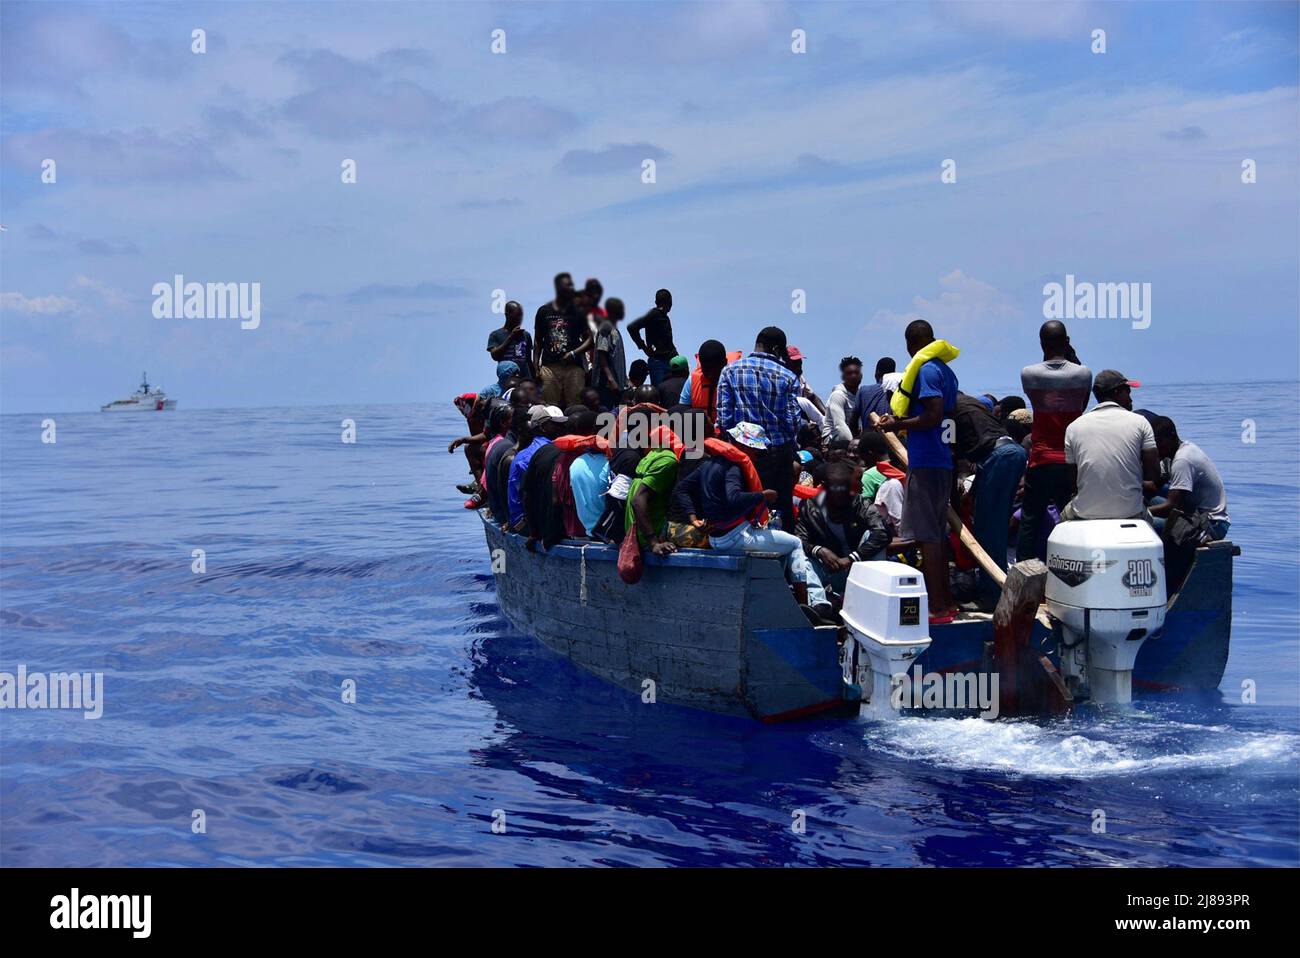 Caribbean Sea, Turks and Caicos. 09 May, 2022. A Coast Guard Cutter Campbell law enforcement crew stops a grossly overloaded, unsafe vessel carrying Haitian migrants attempting to flee the ongoing political instability of Haiti, May 9, 2022 near Turks and Caicos. Stock Photo